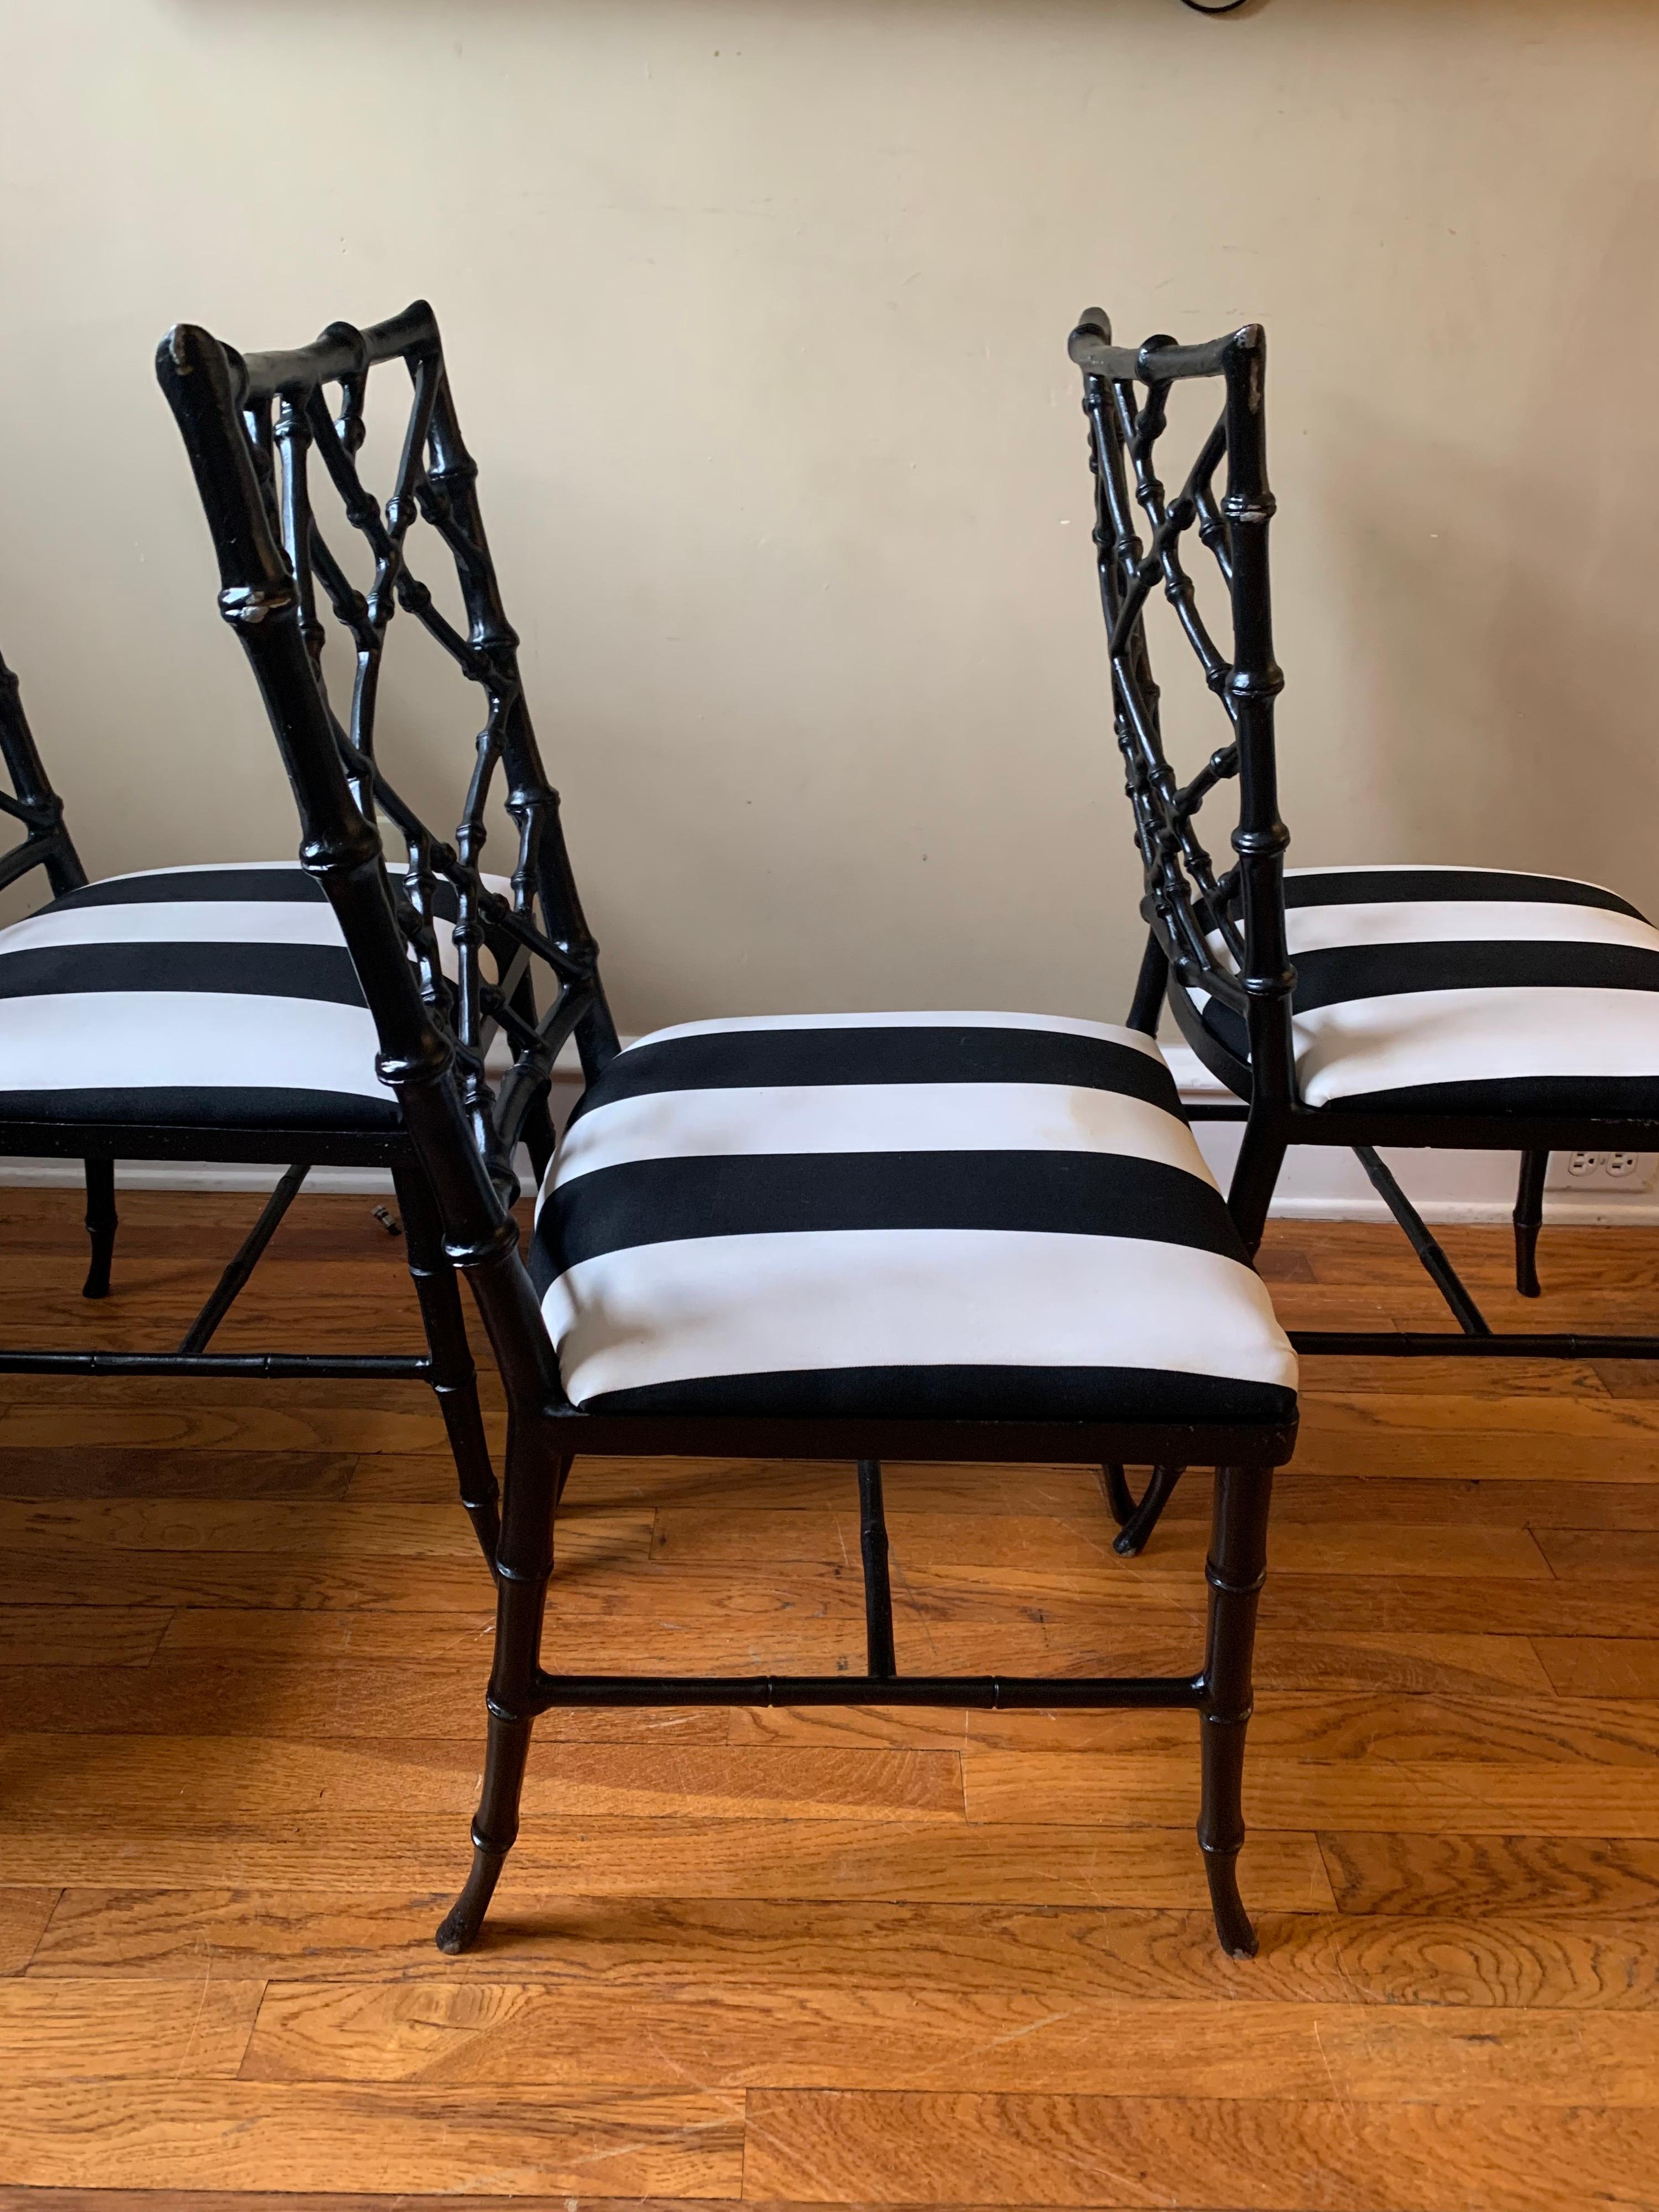 Hand-Crafted Hollywood Regency Faux-Bamboo Cast Metal Chairs by Phyllis Morris, Set of 4